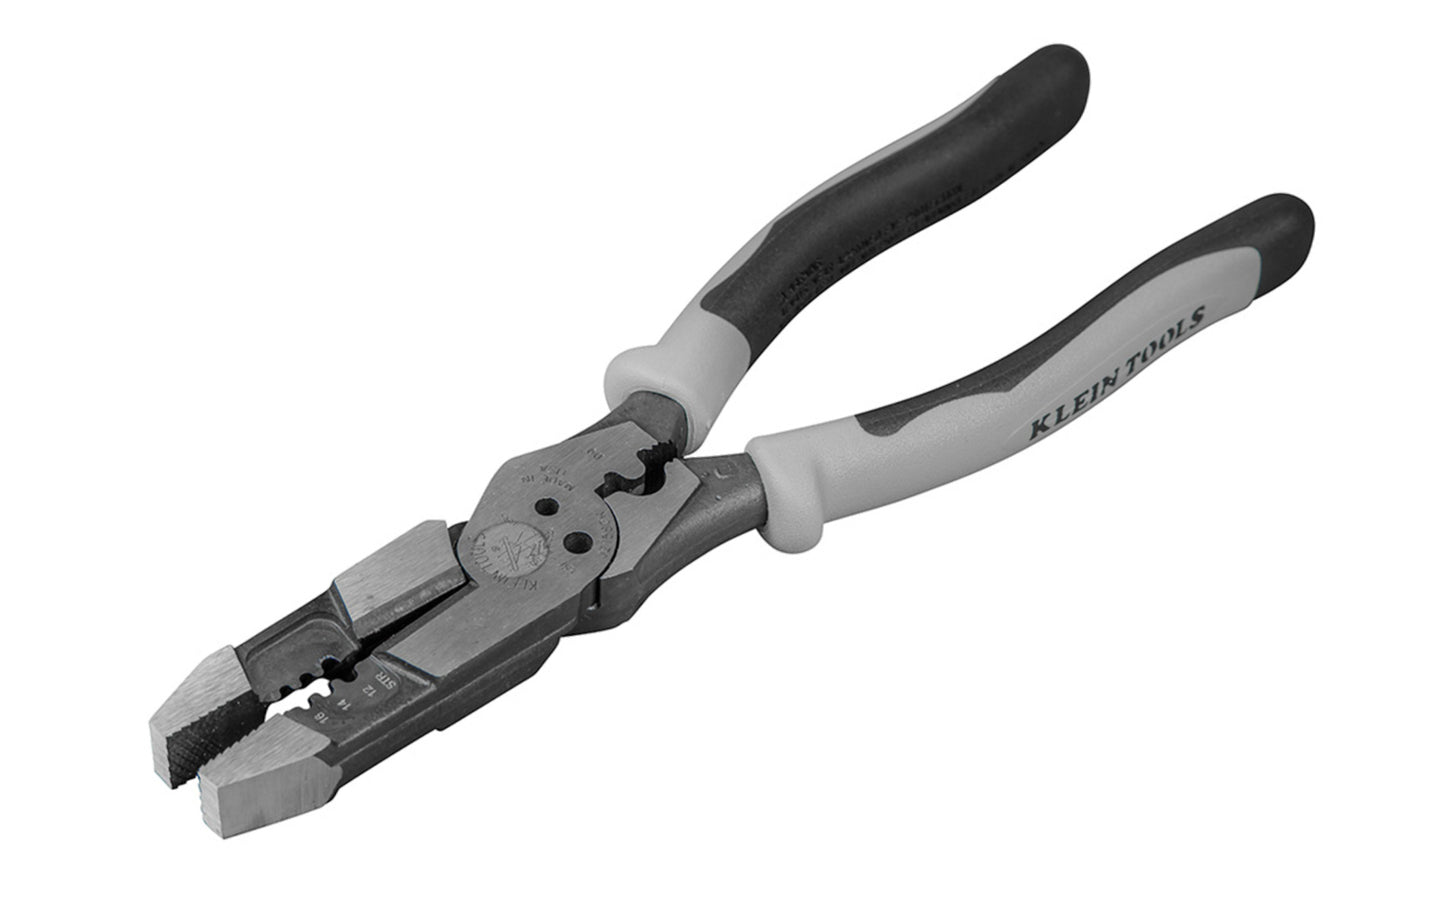 The Klein Tools Hybrid Pliers with Crimper & Wire Stripper can strip, cut, twist, shear & crimp all in the same tool. With full length, induction hardened knives & a high-leverage design, these hybrid pliers provide more cutting power on hard wire. Made in USA. Model J215-8CR.